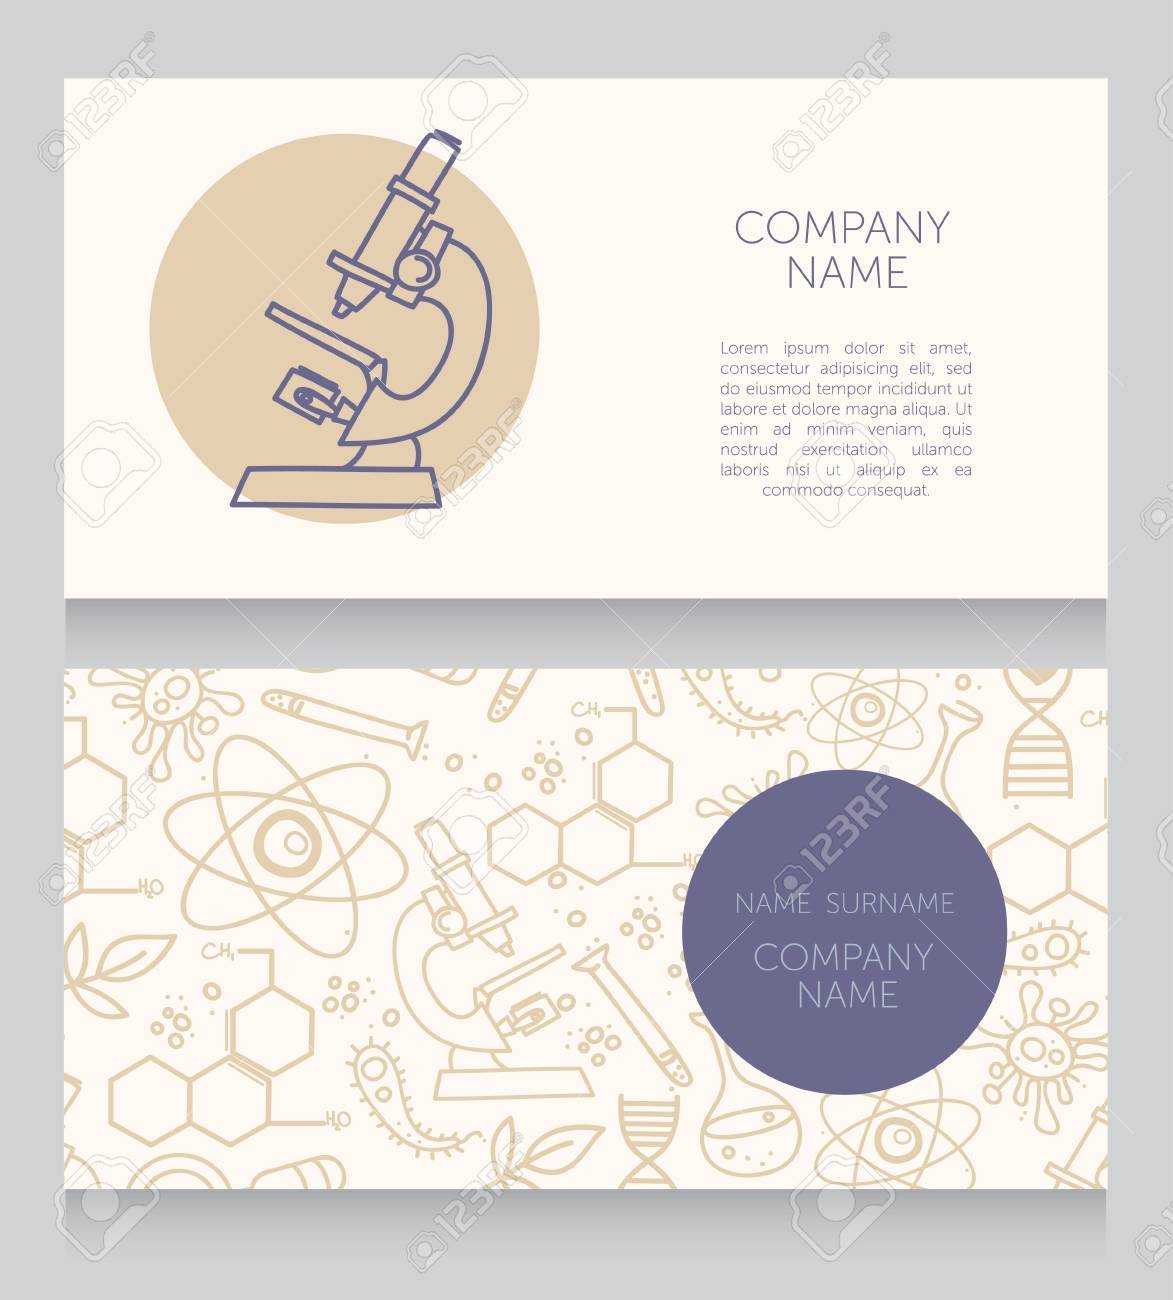 Business Cards Template For Medical Or Science Lab, Vector Illustration For Medical Business Cards Templates Free